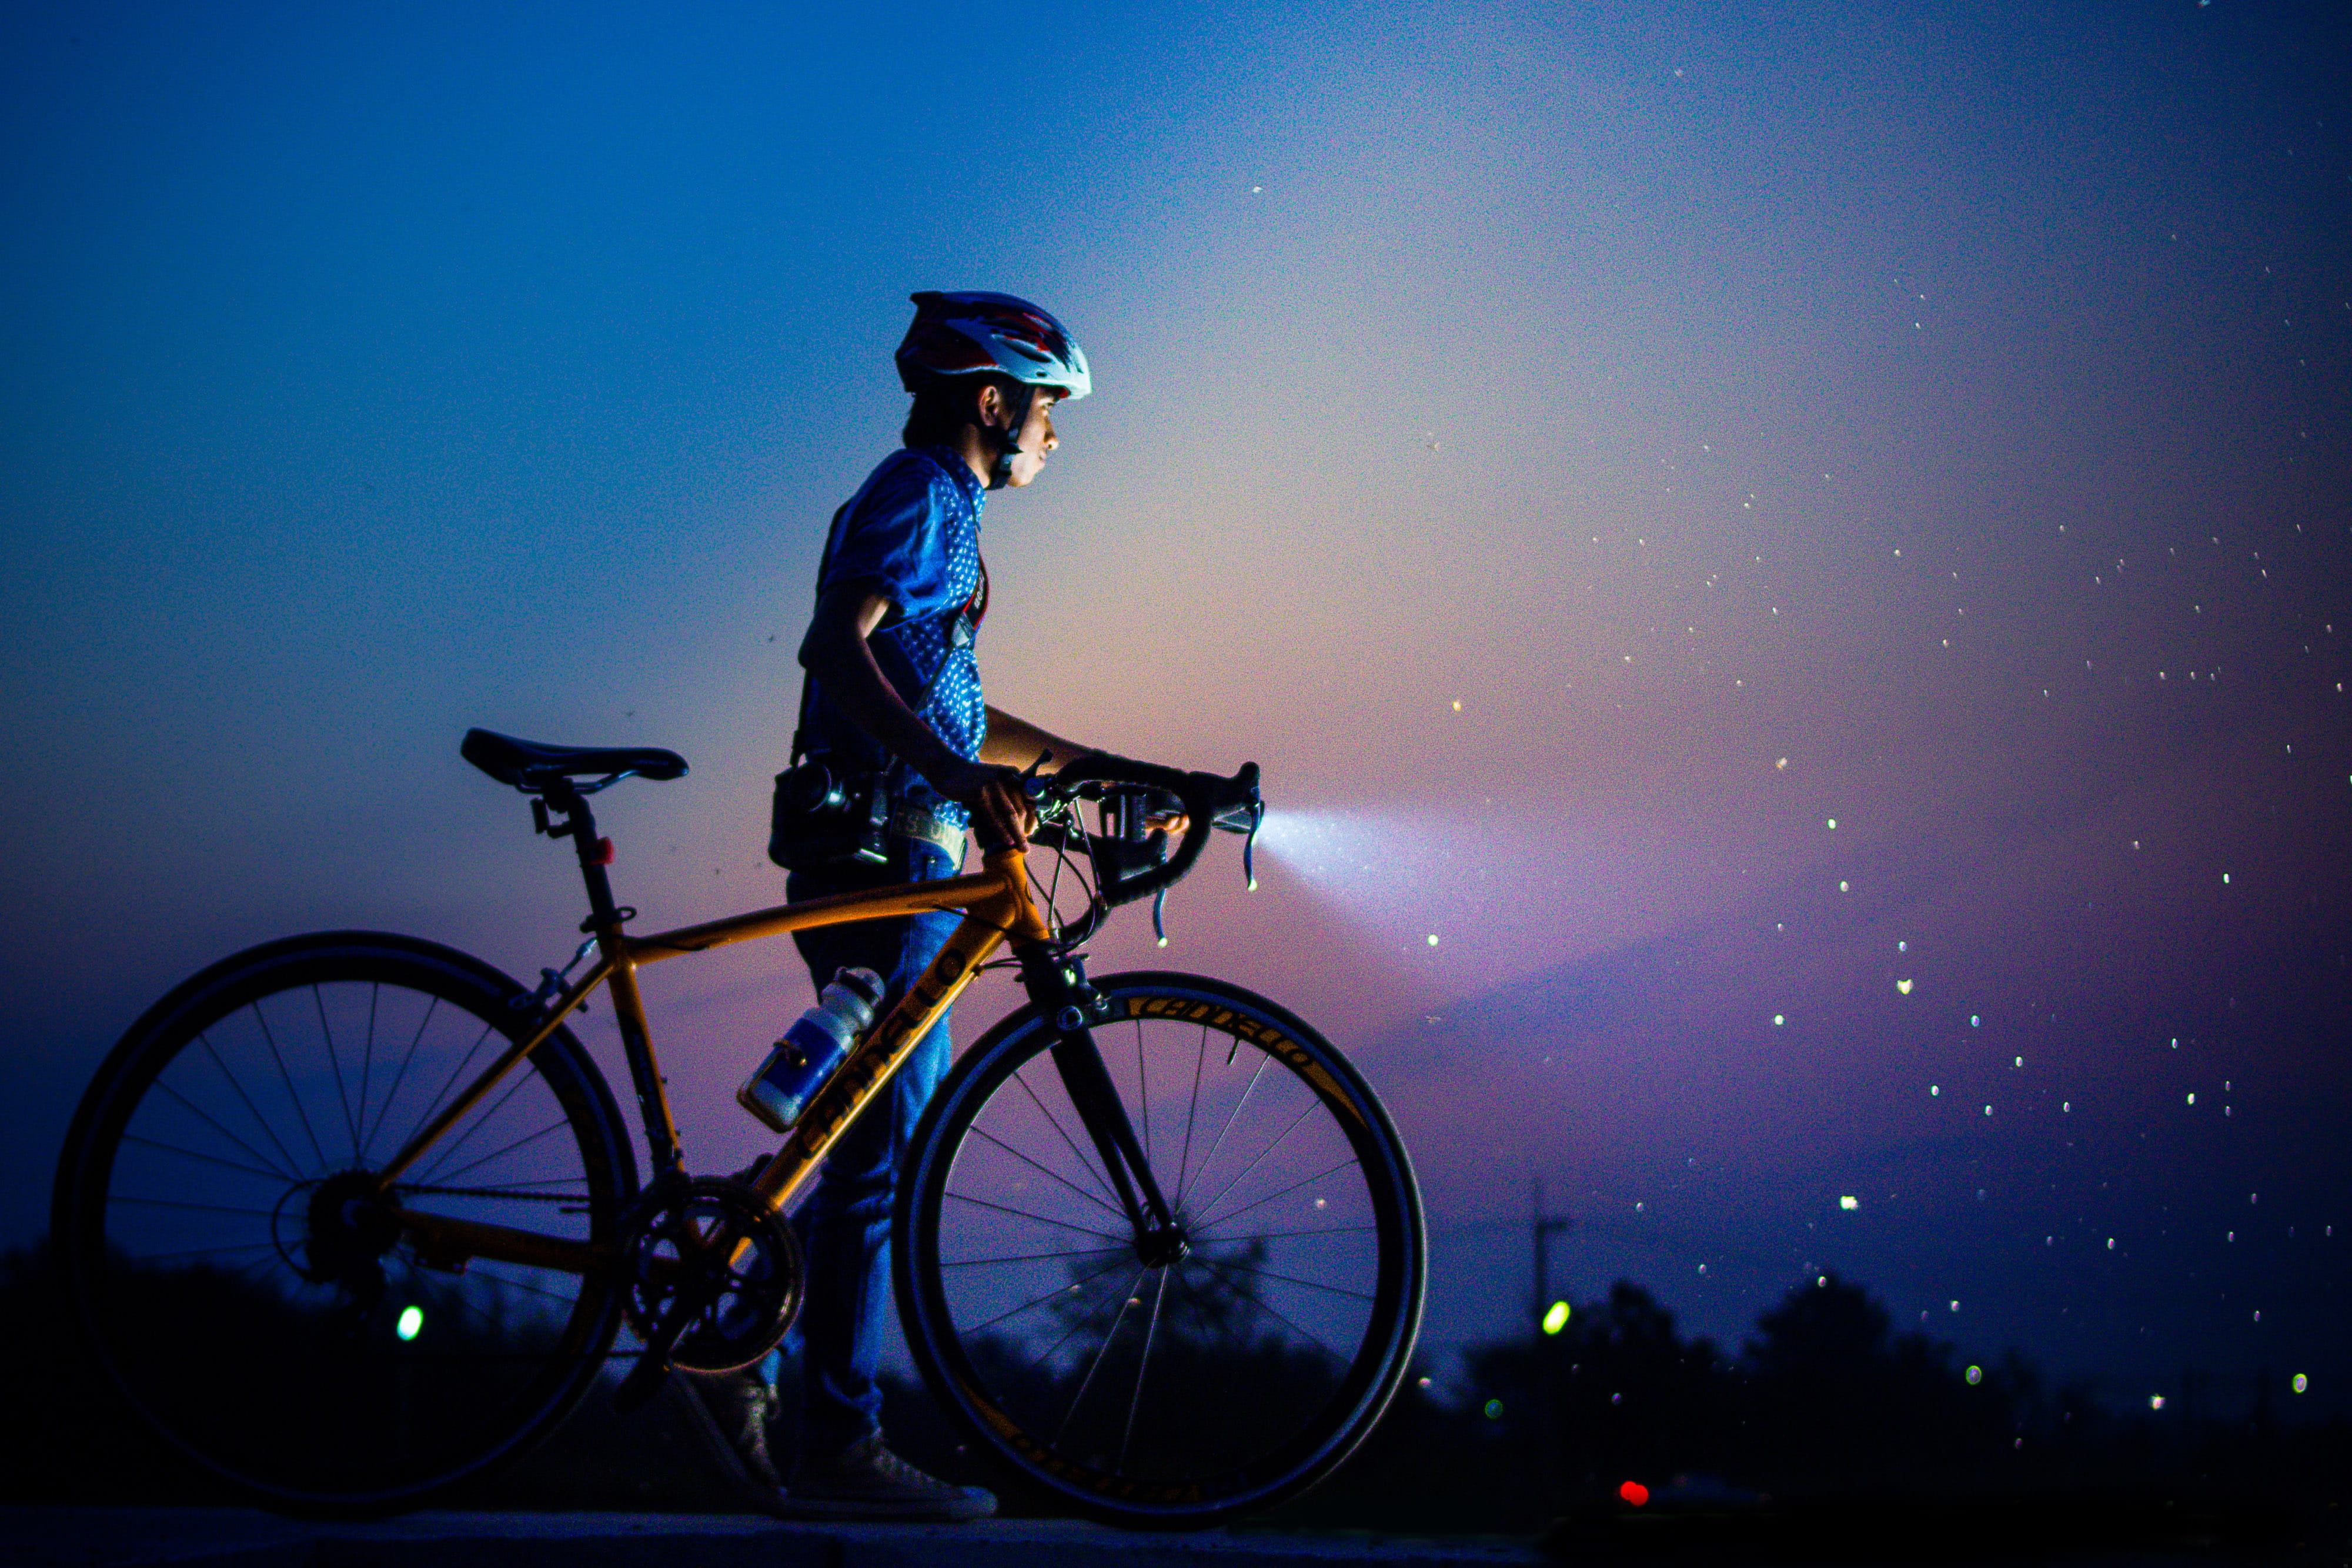 Man out with bicycle at night, people, adventure, bicycles, bike